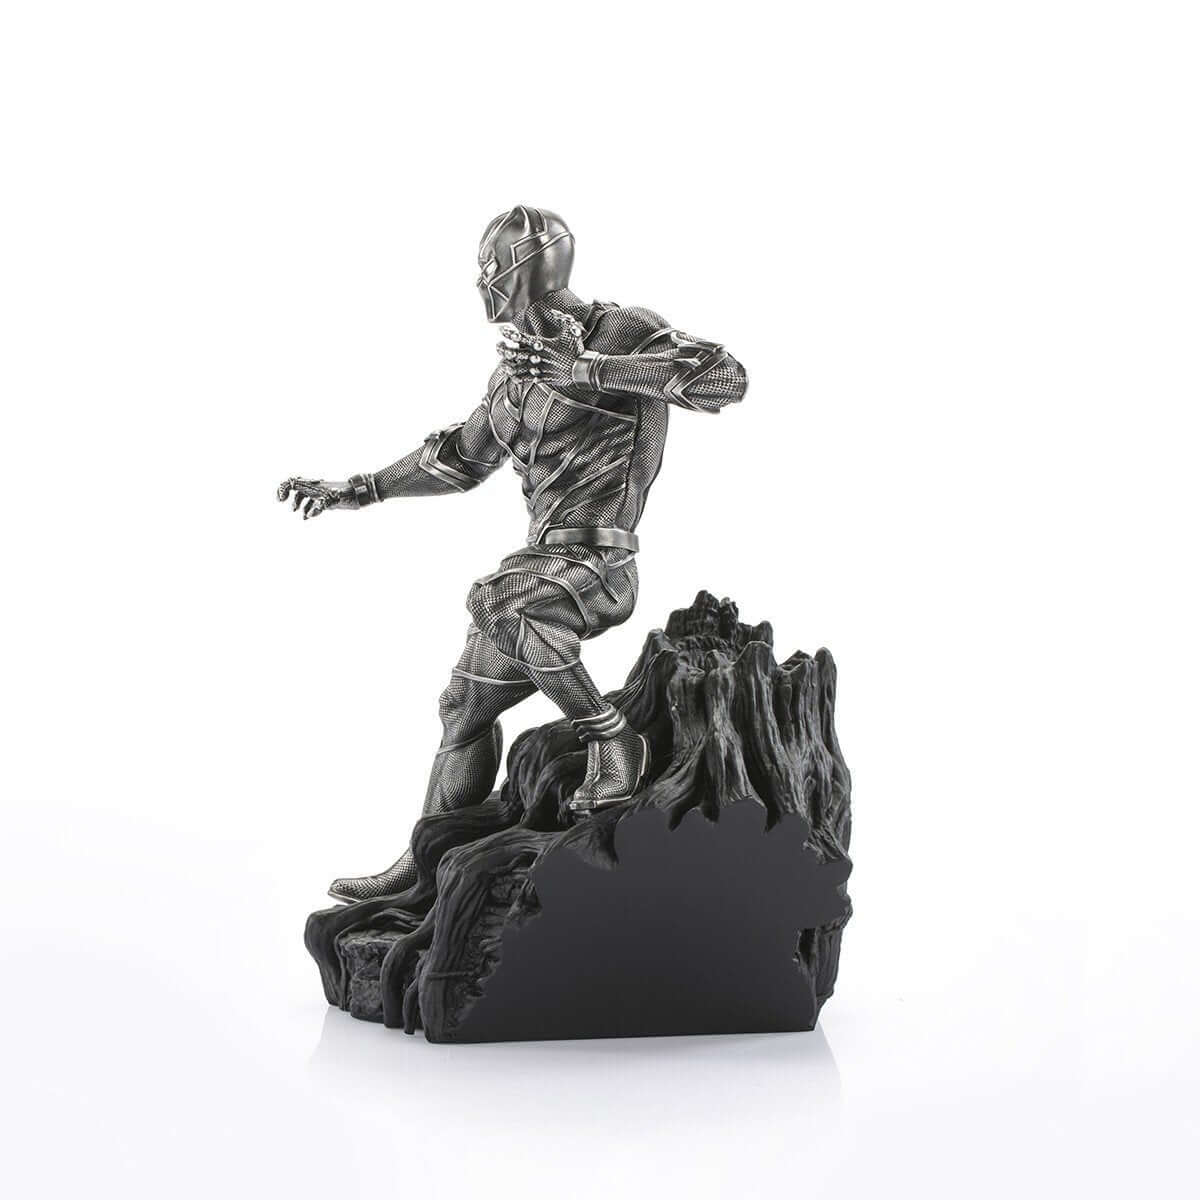 Black Panther Guardian Limited Edition Figurine - Marvel Statue